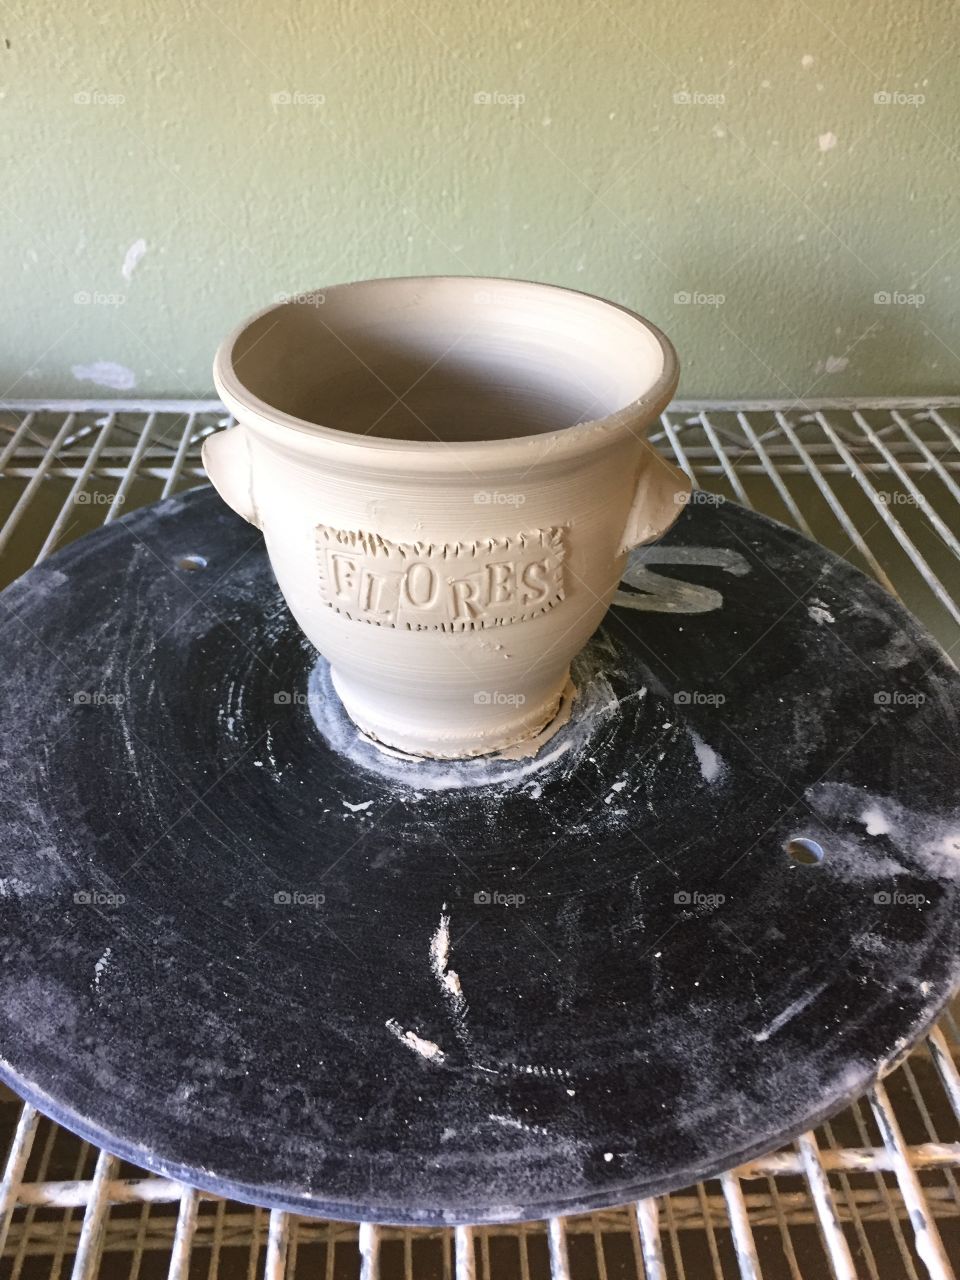 Clay, Pottery, Homemade, Handcrafted, Pot, Made with Creativity and Love